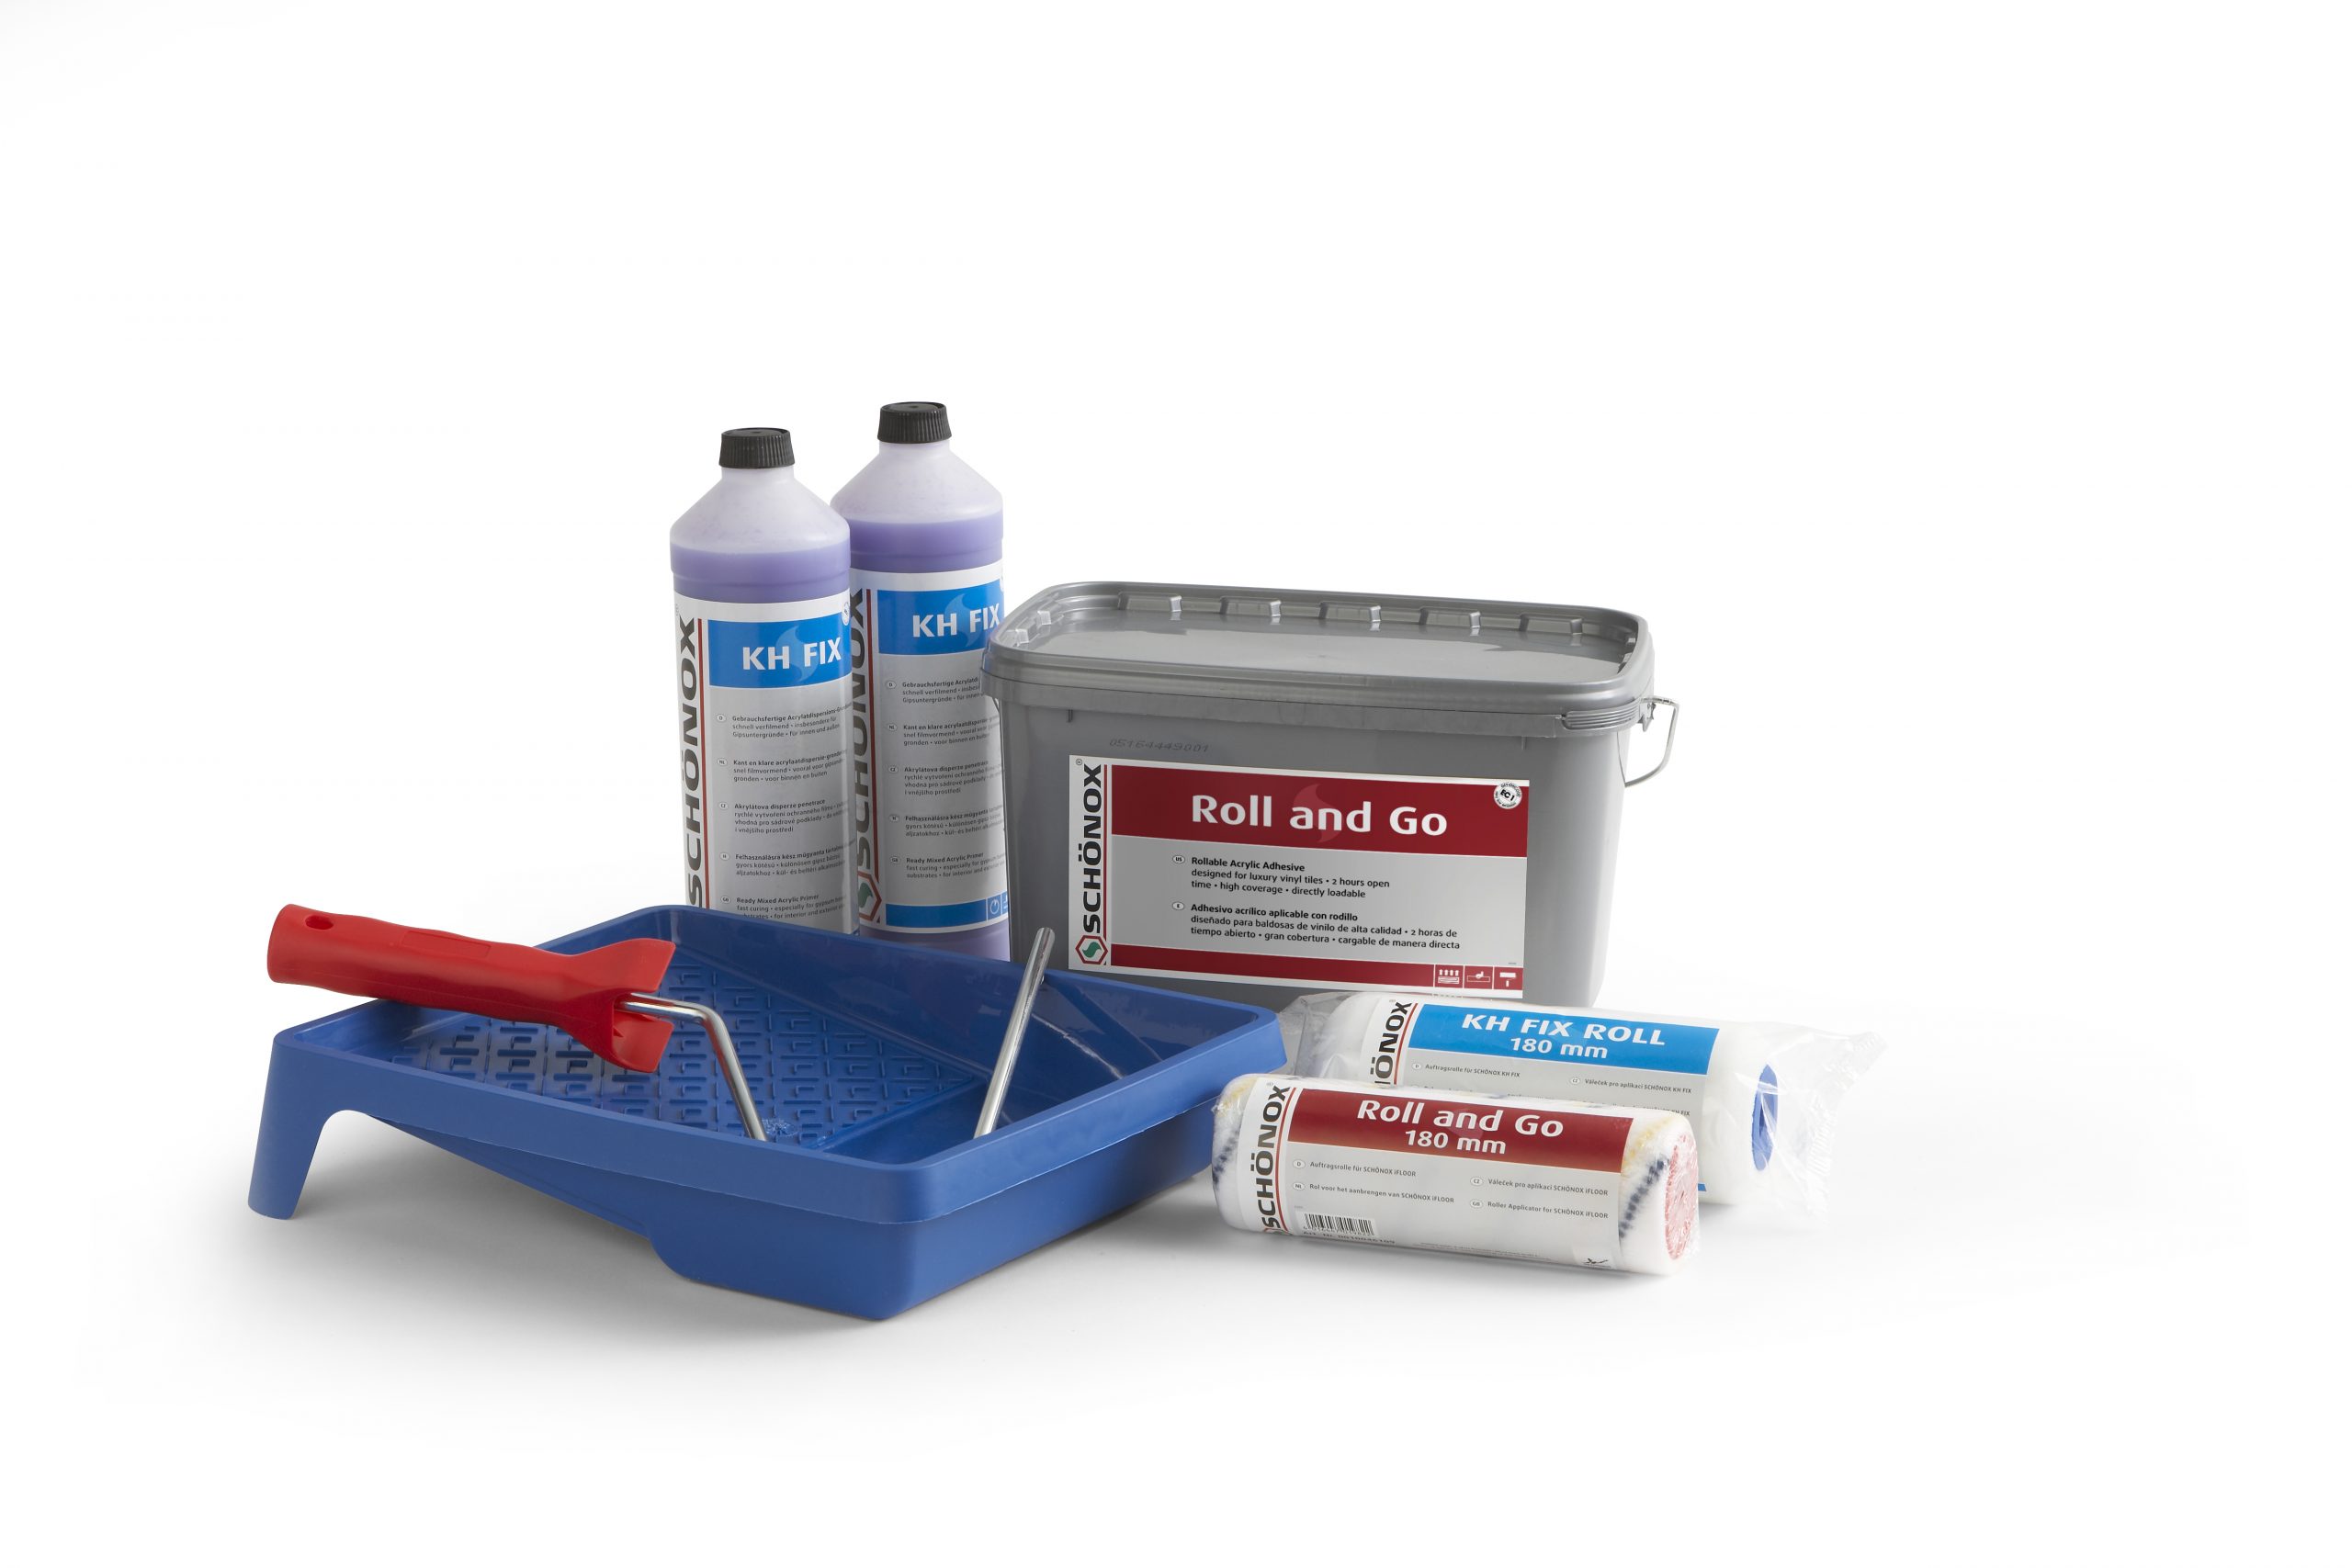 Image of roll & go Product Kit